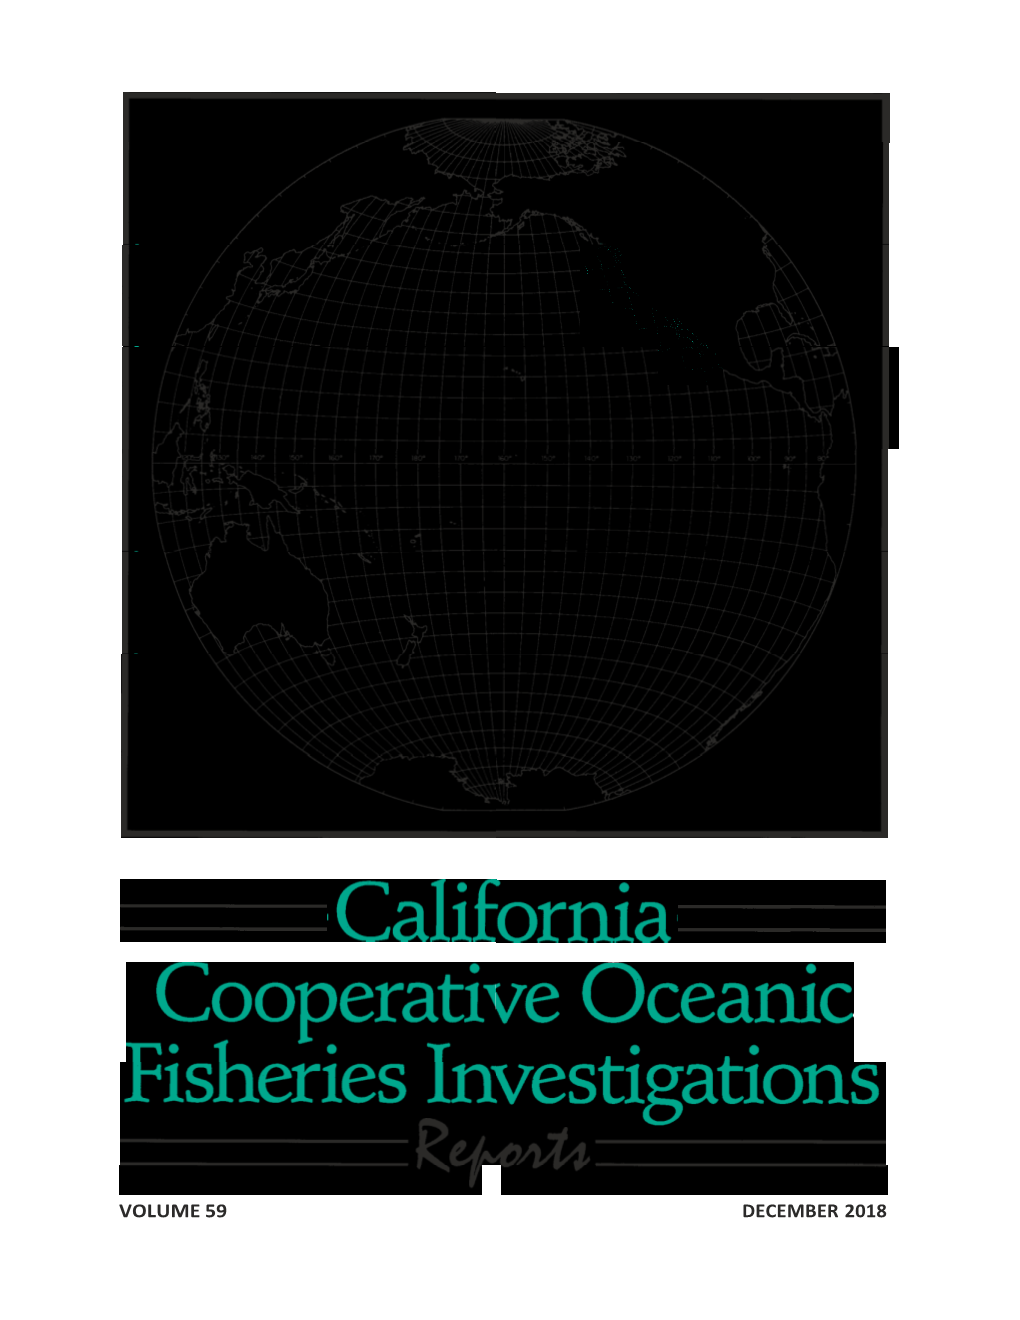 California Cooperative Oceanic Fisheries Investigations and to the Author(S)